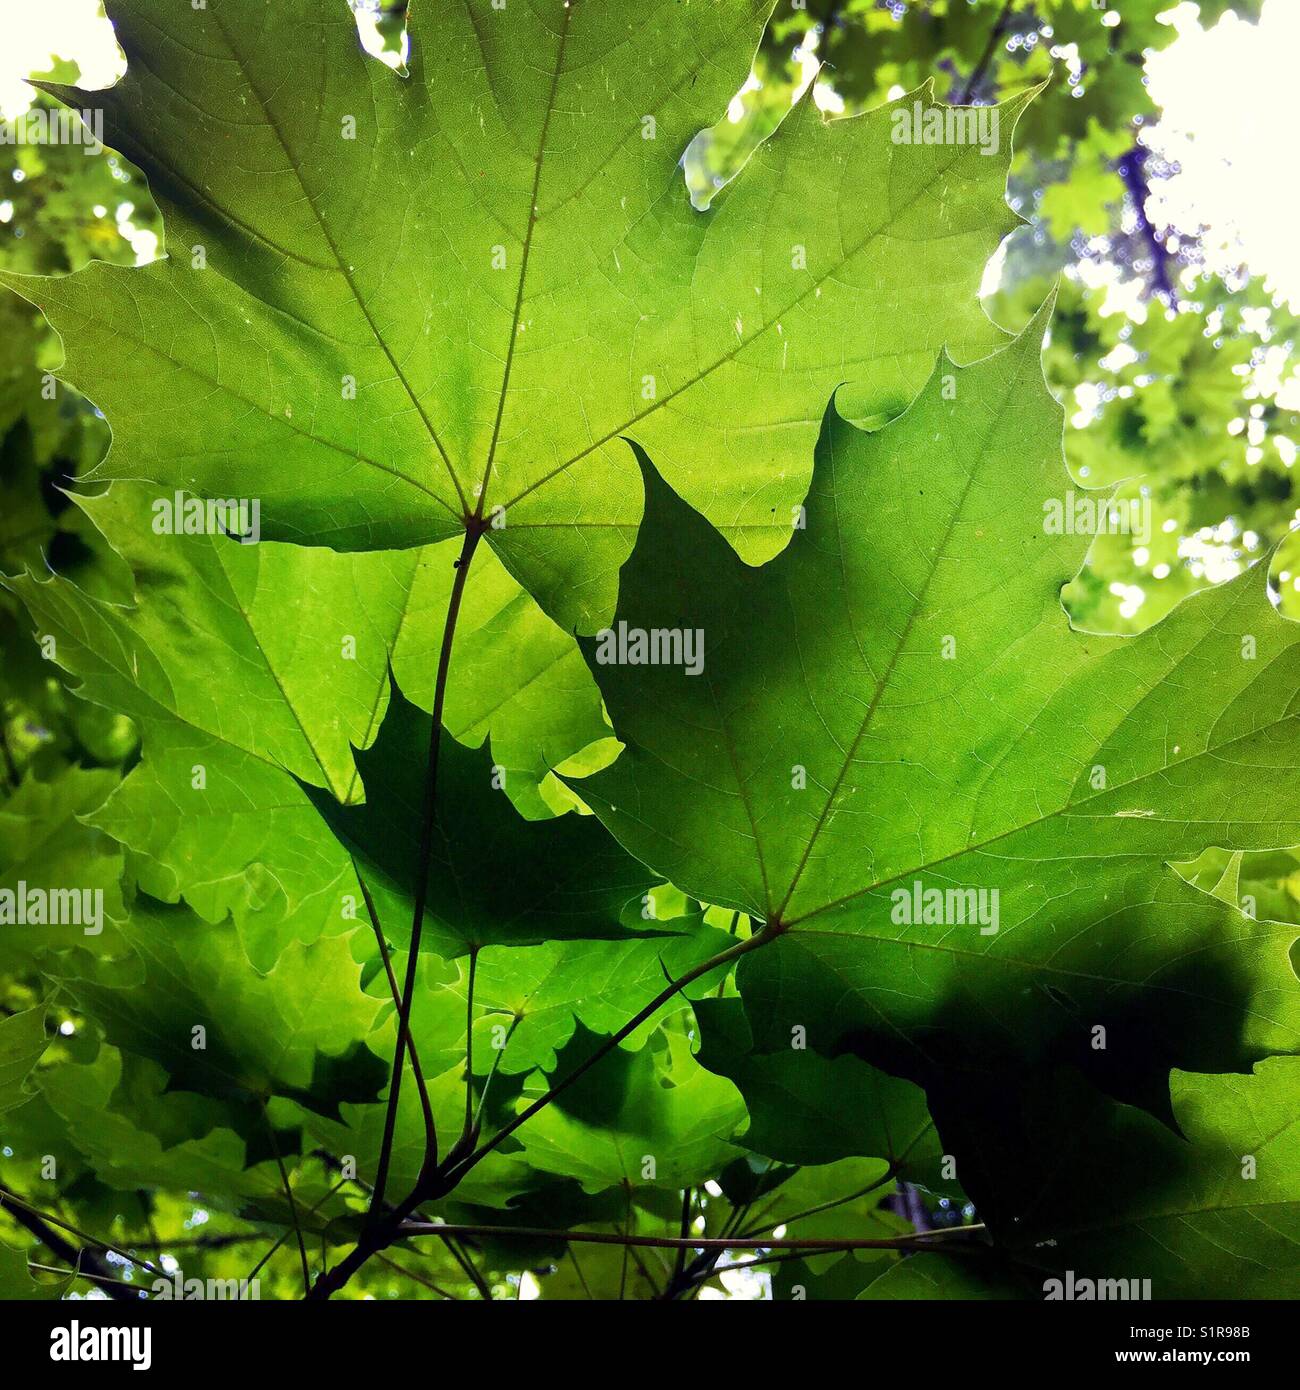 Looking up at the beautiful green leaves of the large leaf maple tree Stock Photo